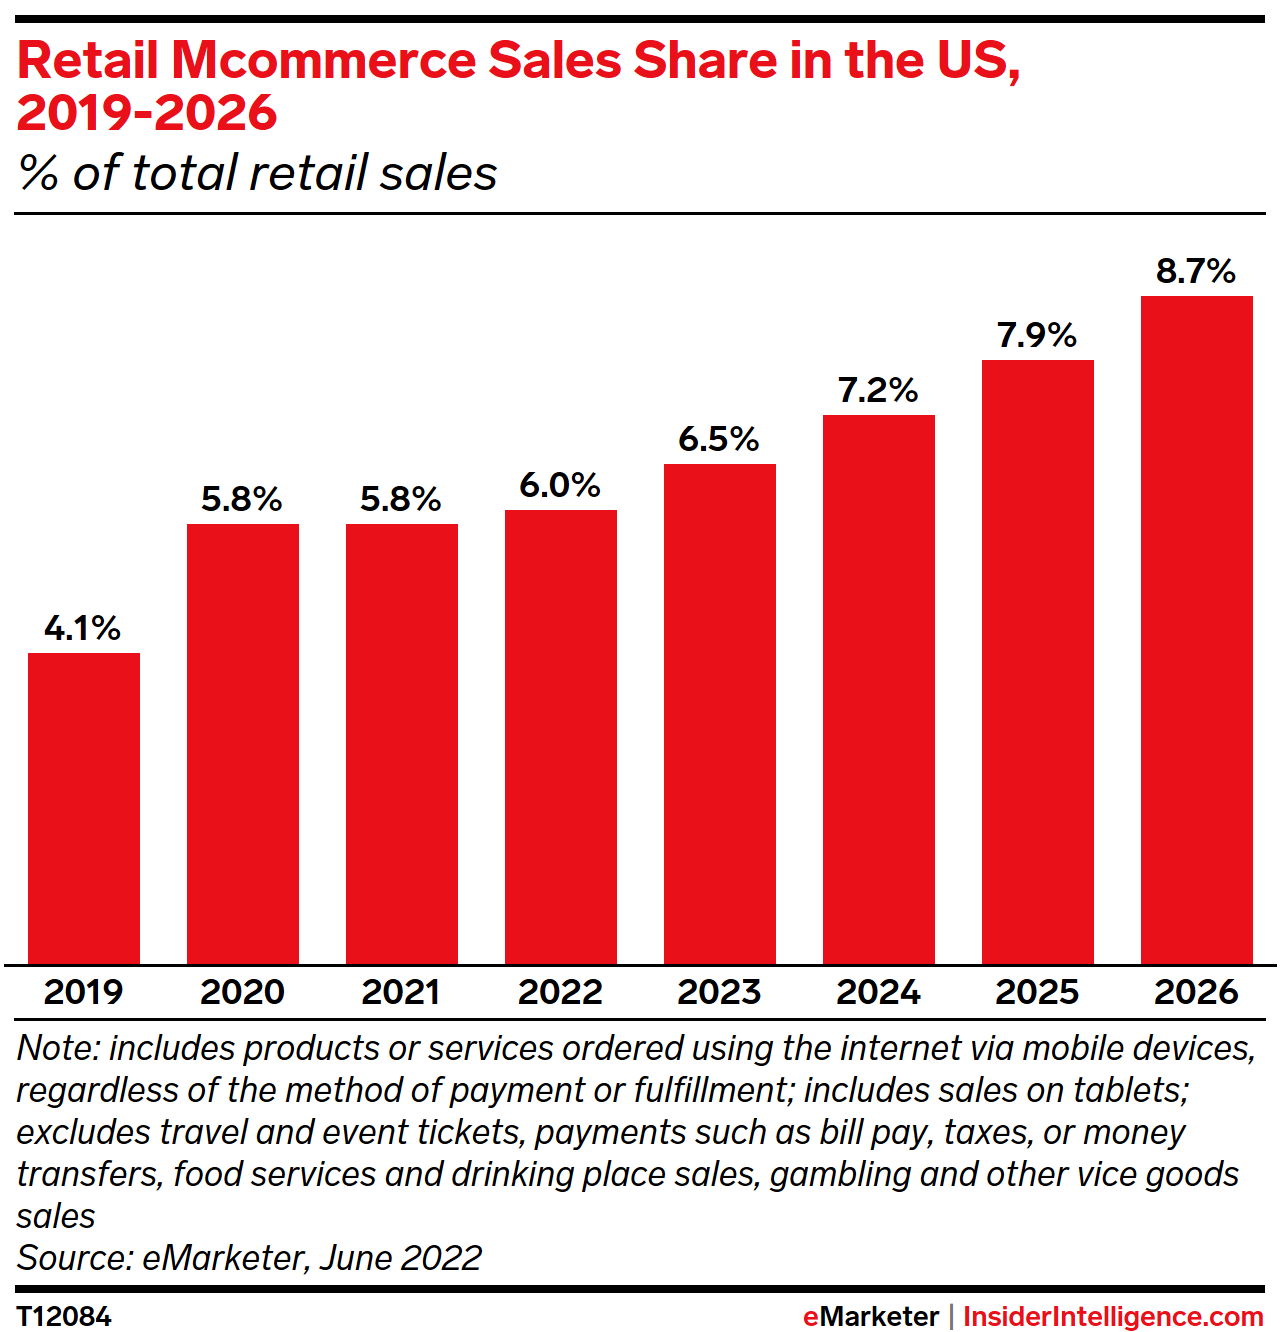 Retail Mcommerce Sales Share in the US, 2019-2026 (% of total retail sales)